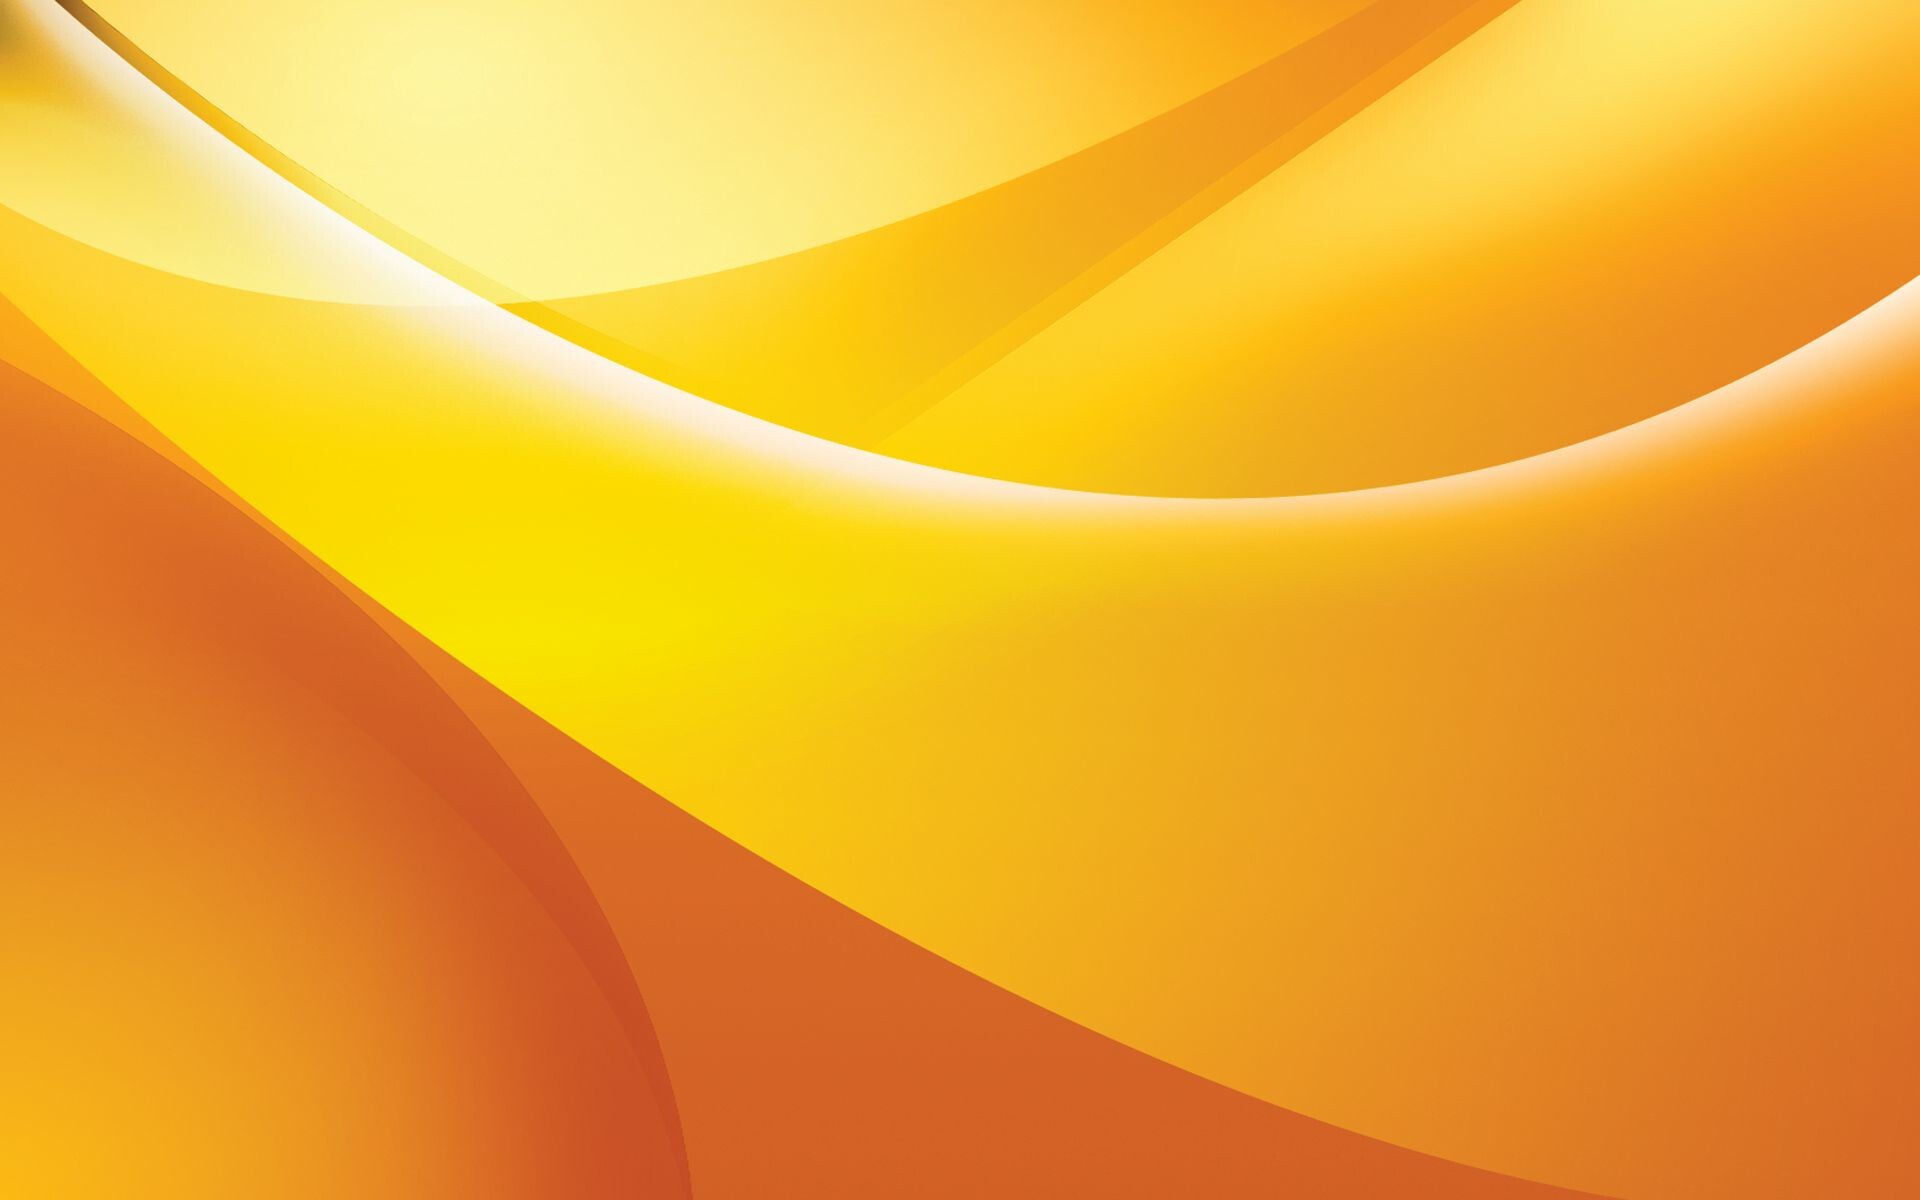 Orange Desktop Wallpaper: HD, 4K, 5K for PC and Mobile. Download free image for iPhone, Android